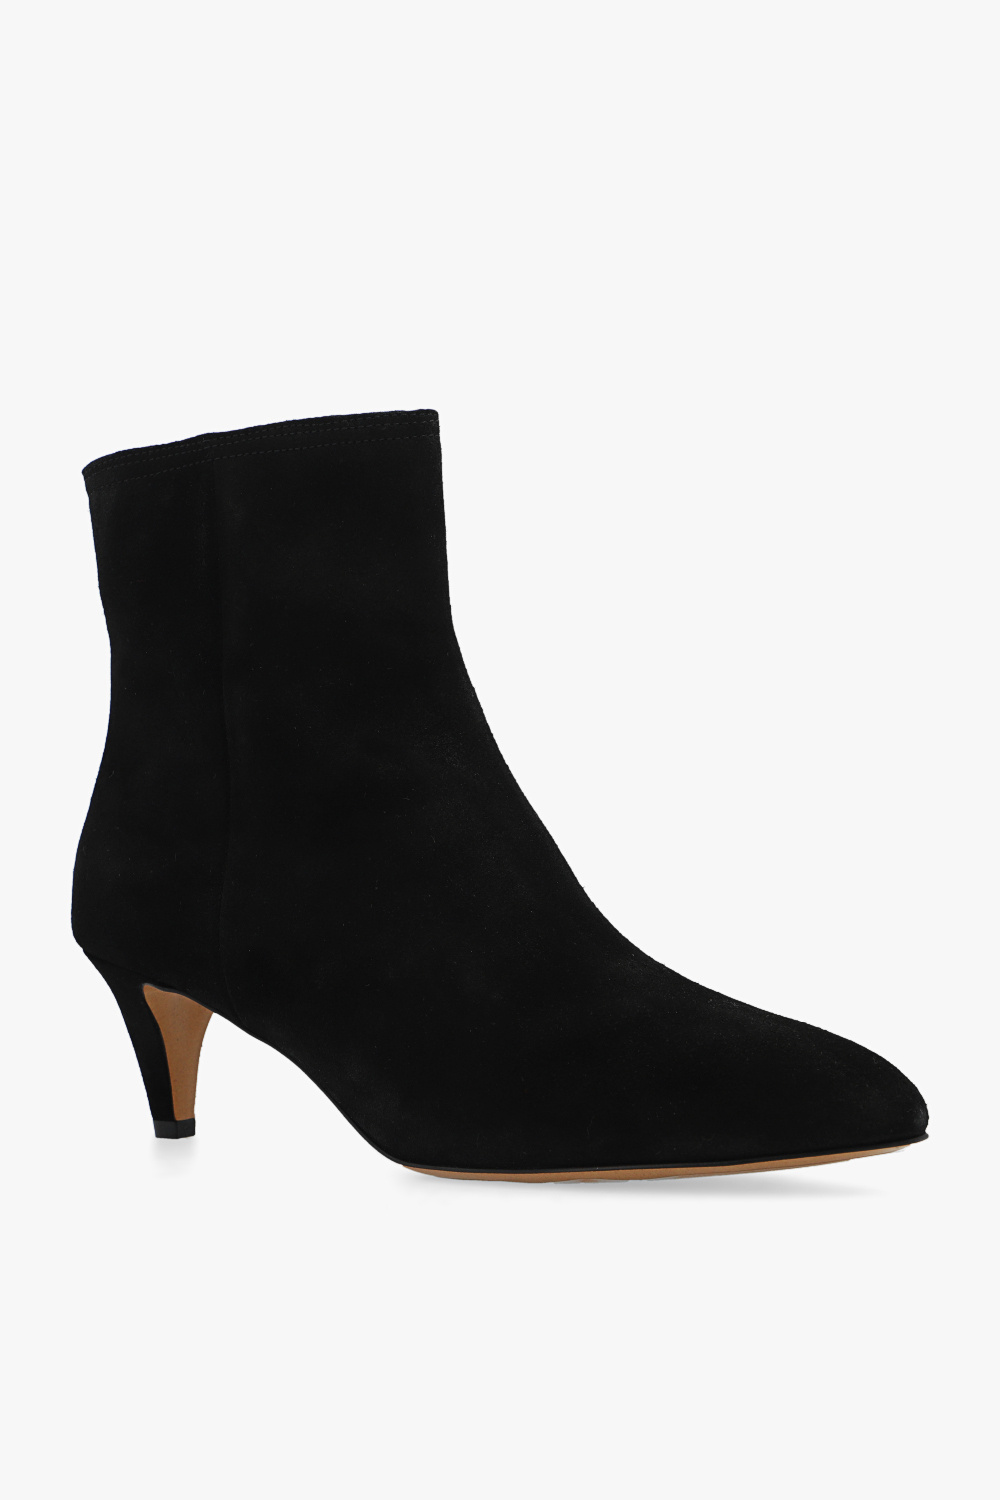 Isabel Marant ‘City’ heeled ankle boots